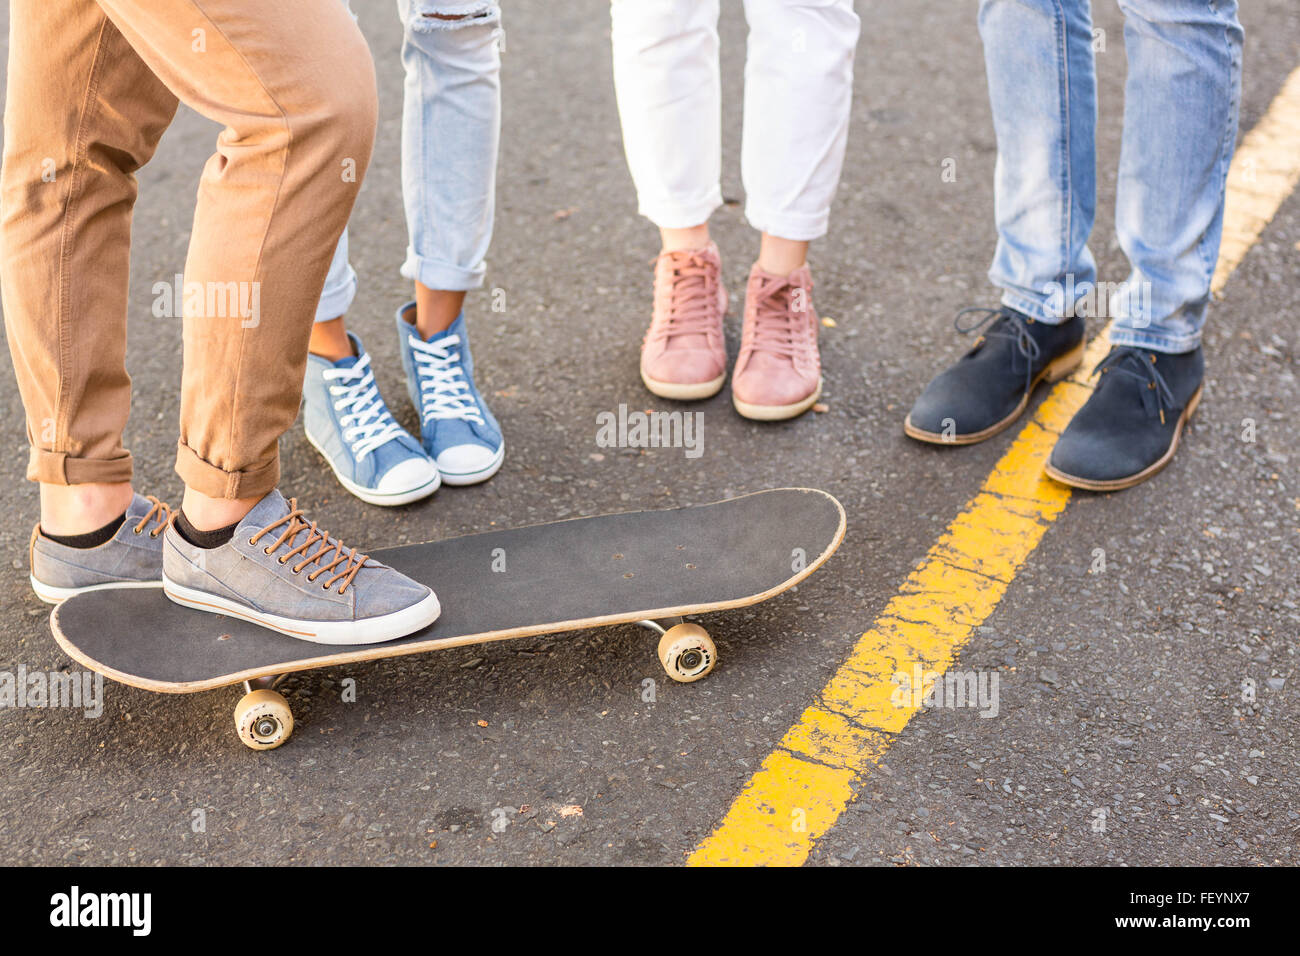 Lower section of hip friends and skateboard Stock Photo